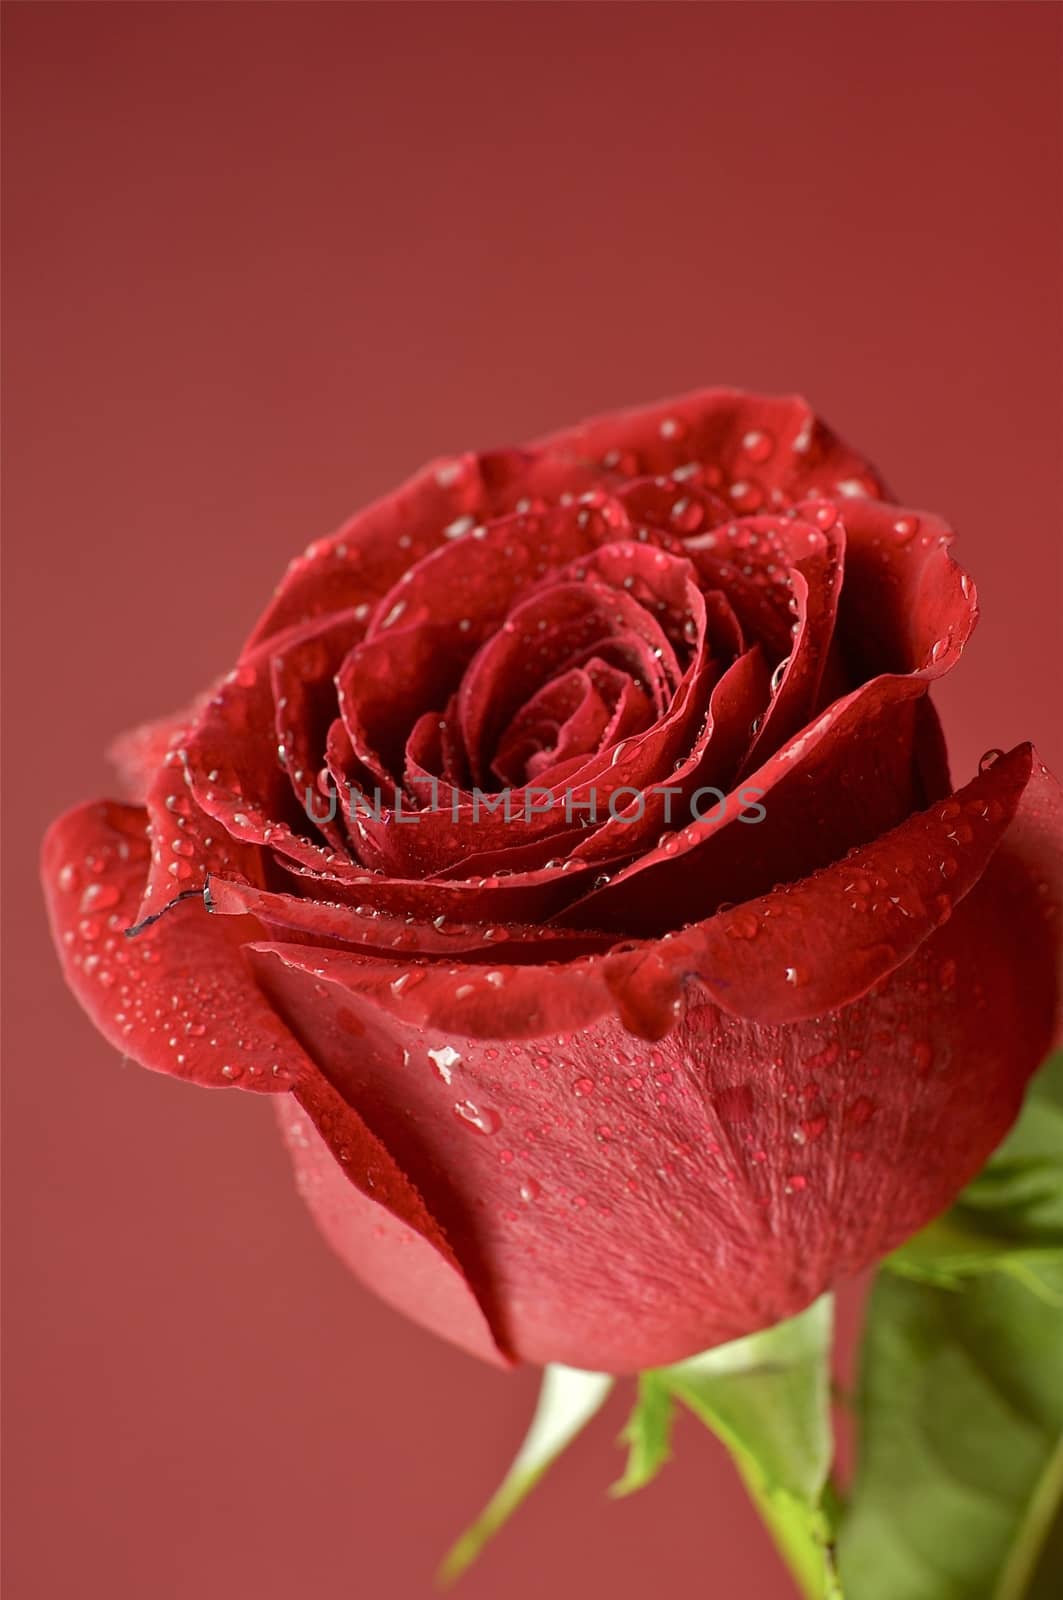 Rose in Red. Fresh Rose Flower on Red-Burgundy Background. Love Theme